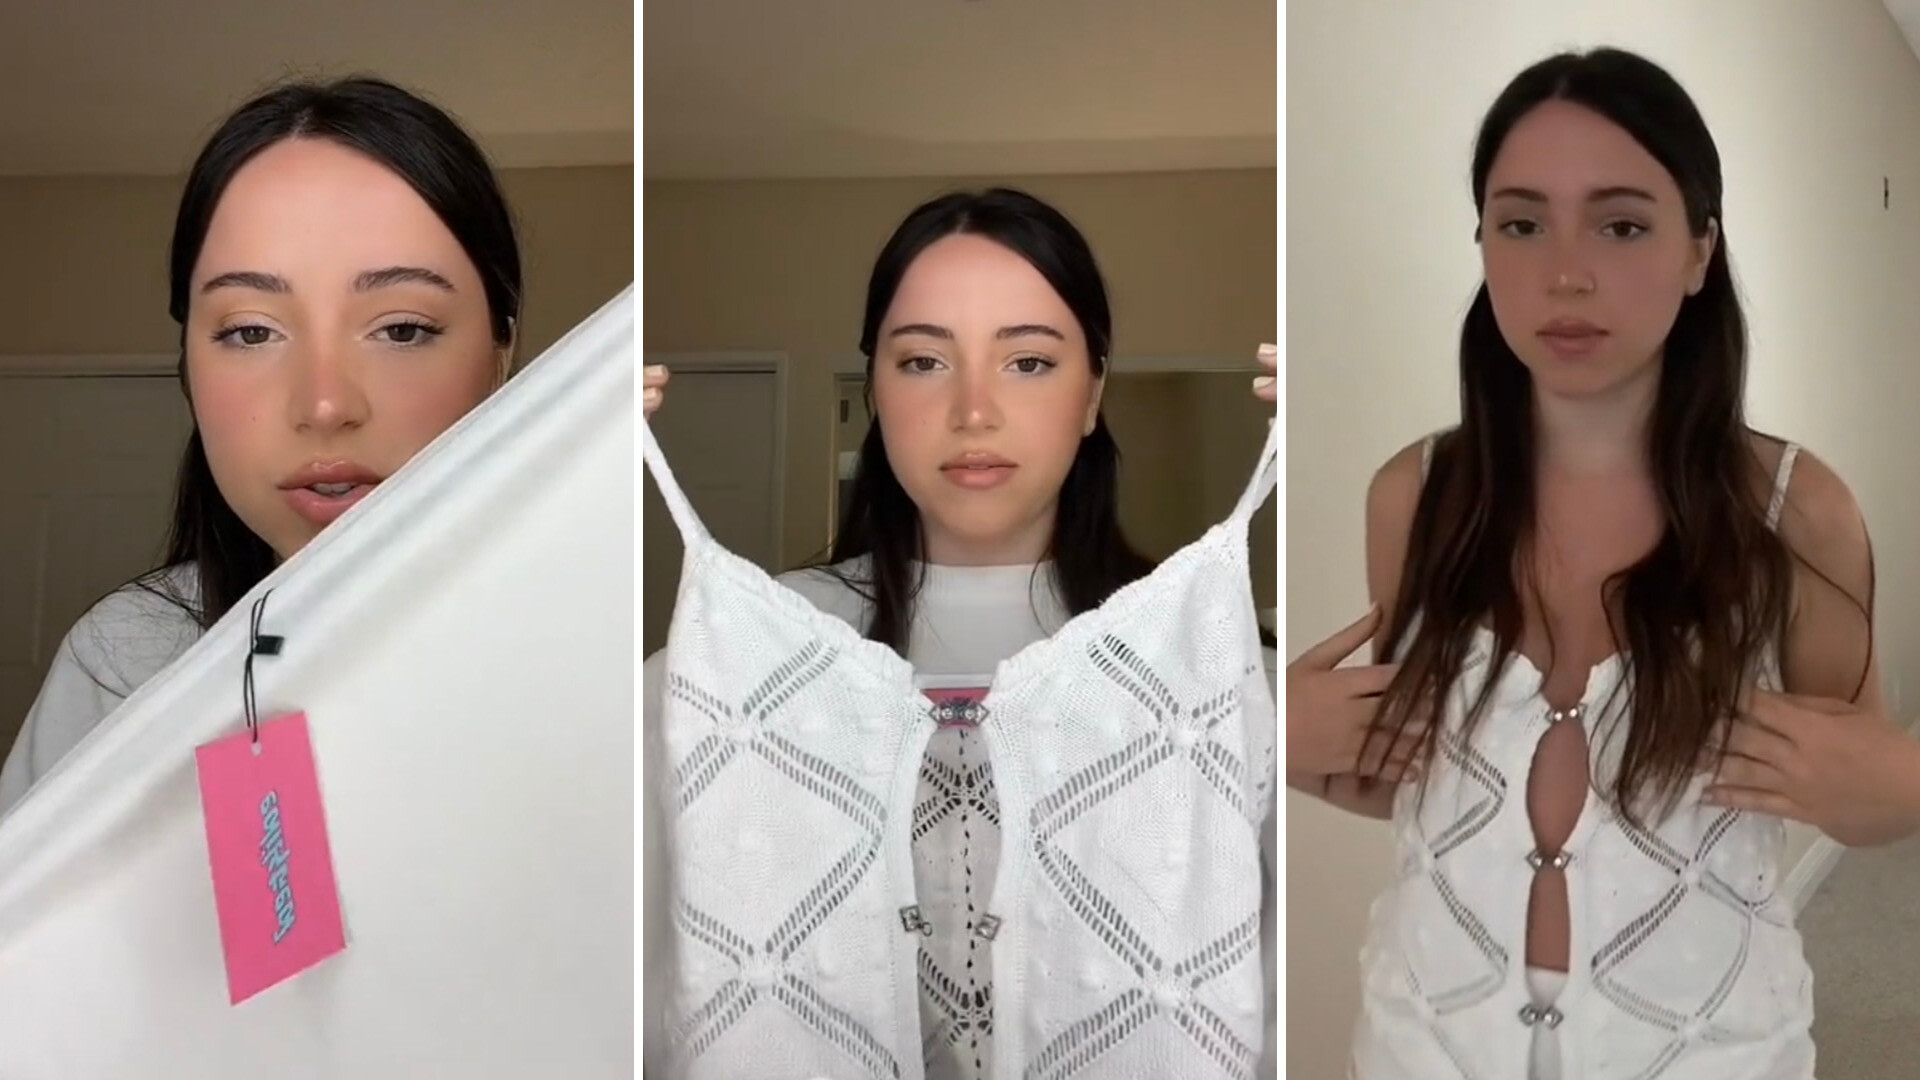 Online shopper shares disbelief after opening package from fast-fashion brand: ‘I’m embarrassed I spent money on this’